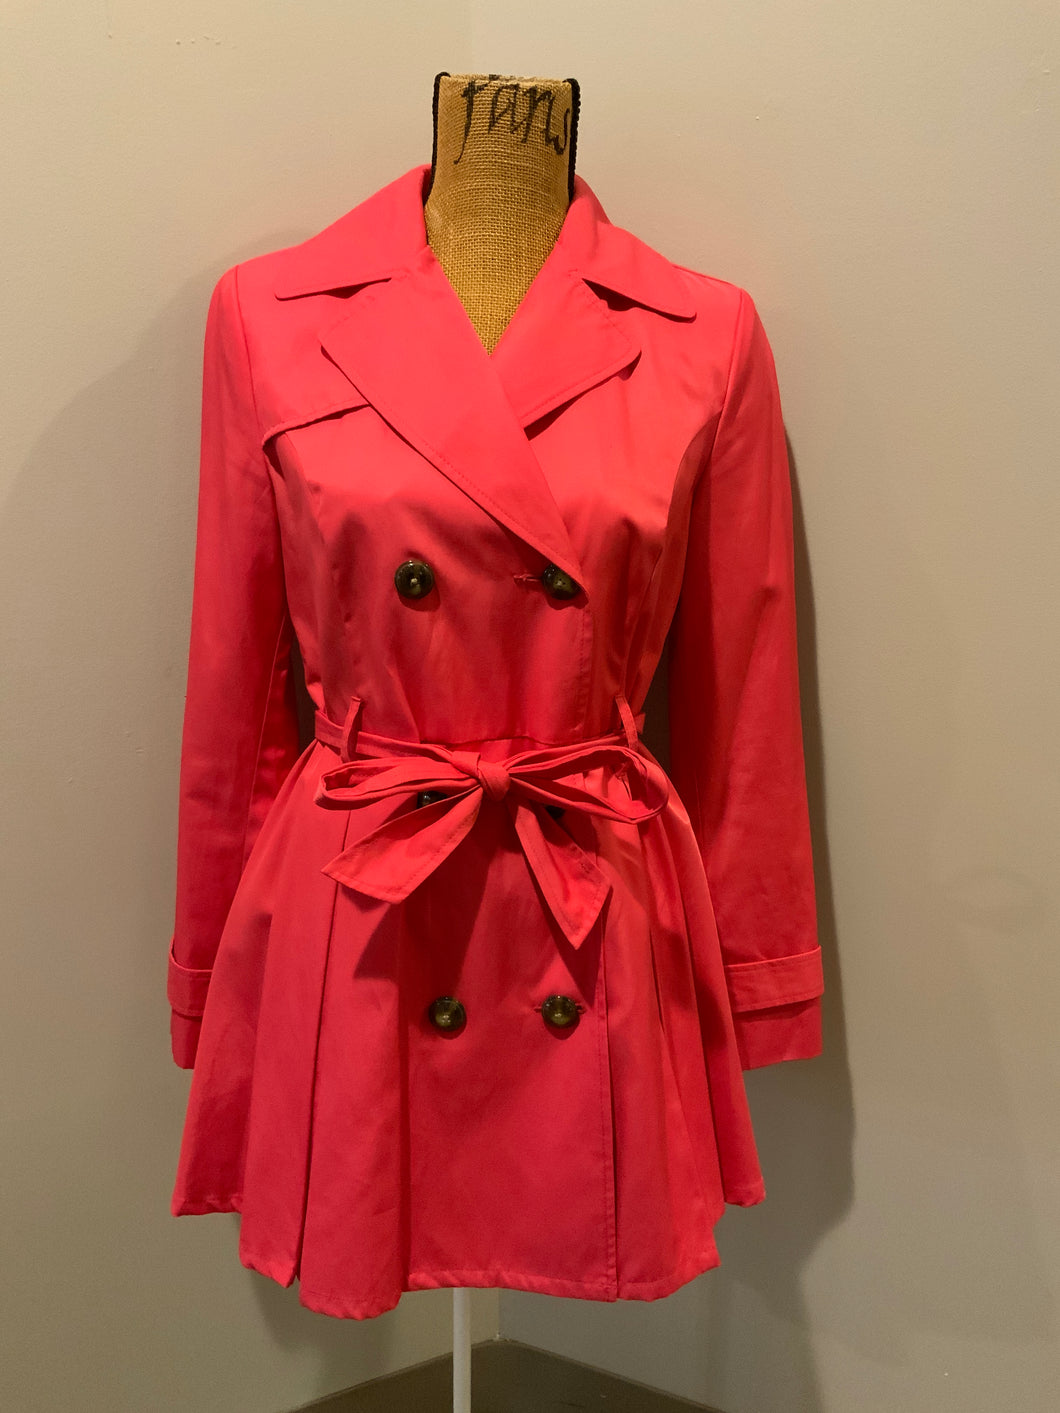 Kingspier Vintage - Black Rivet bright pink double breasted trench coat with belt, welt pockets, pleated skirt and vibrant flower motif lining. Size small.